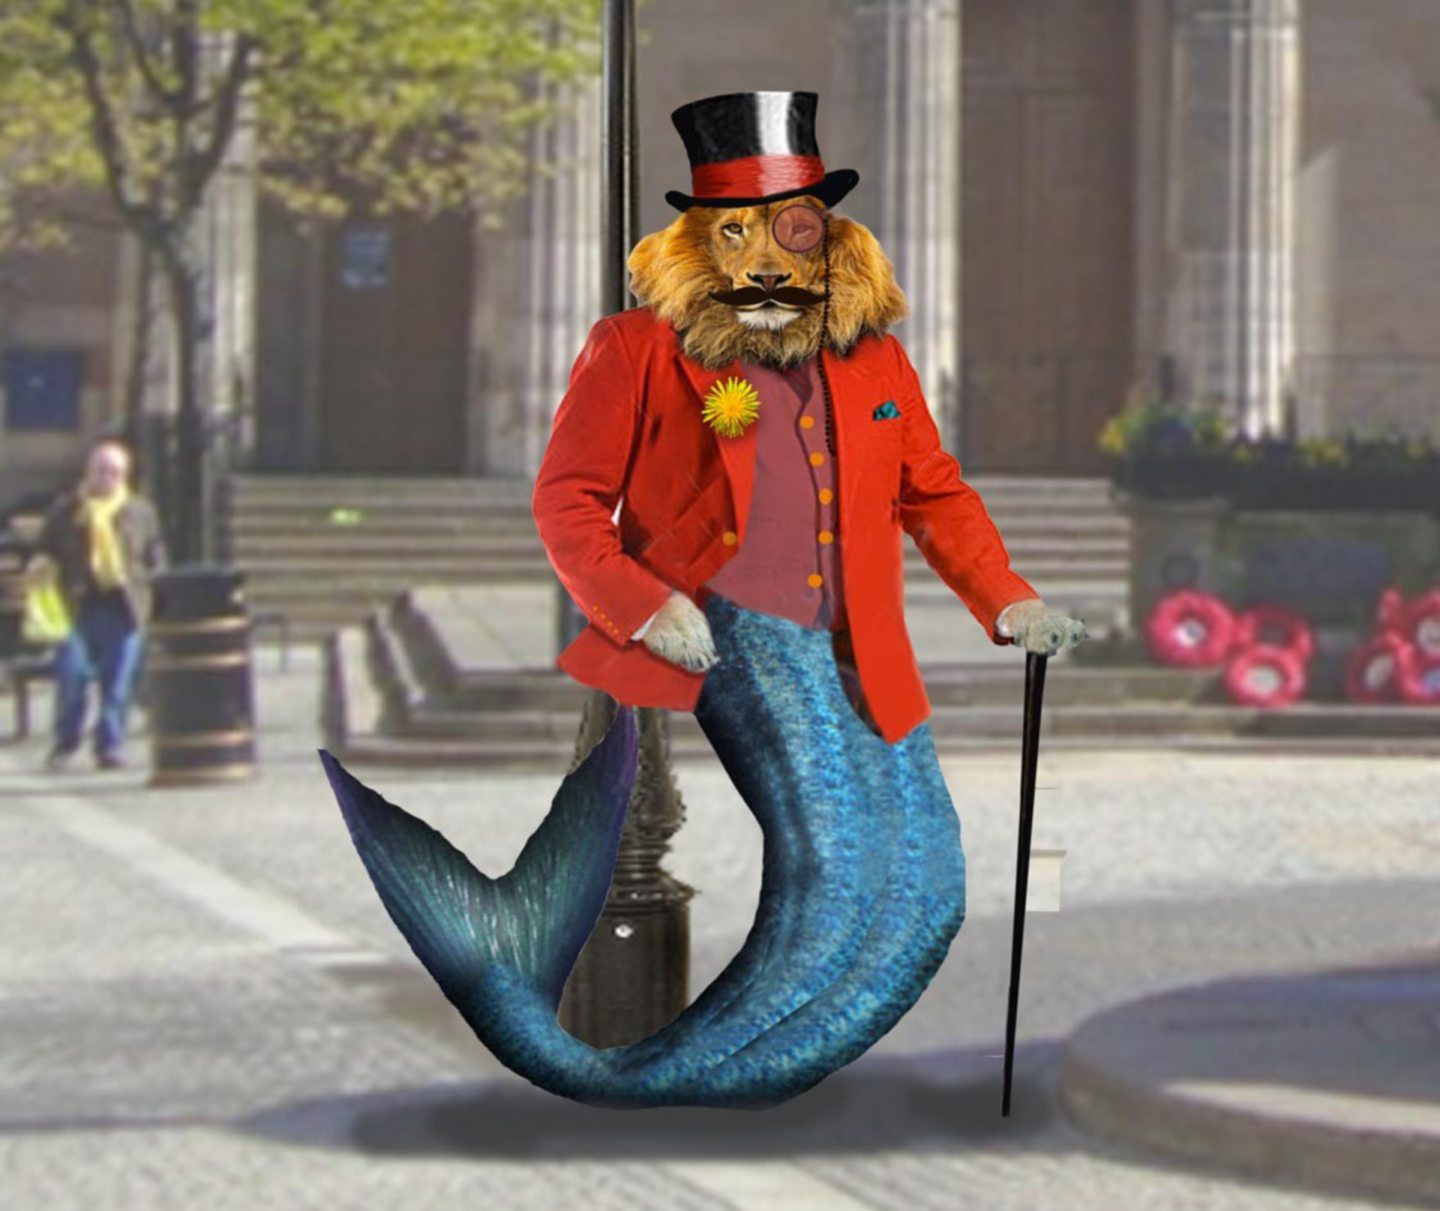 The initial artist impression of Dandy Lion